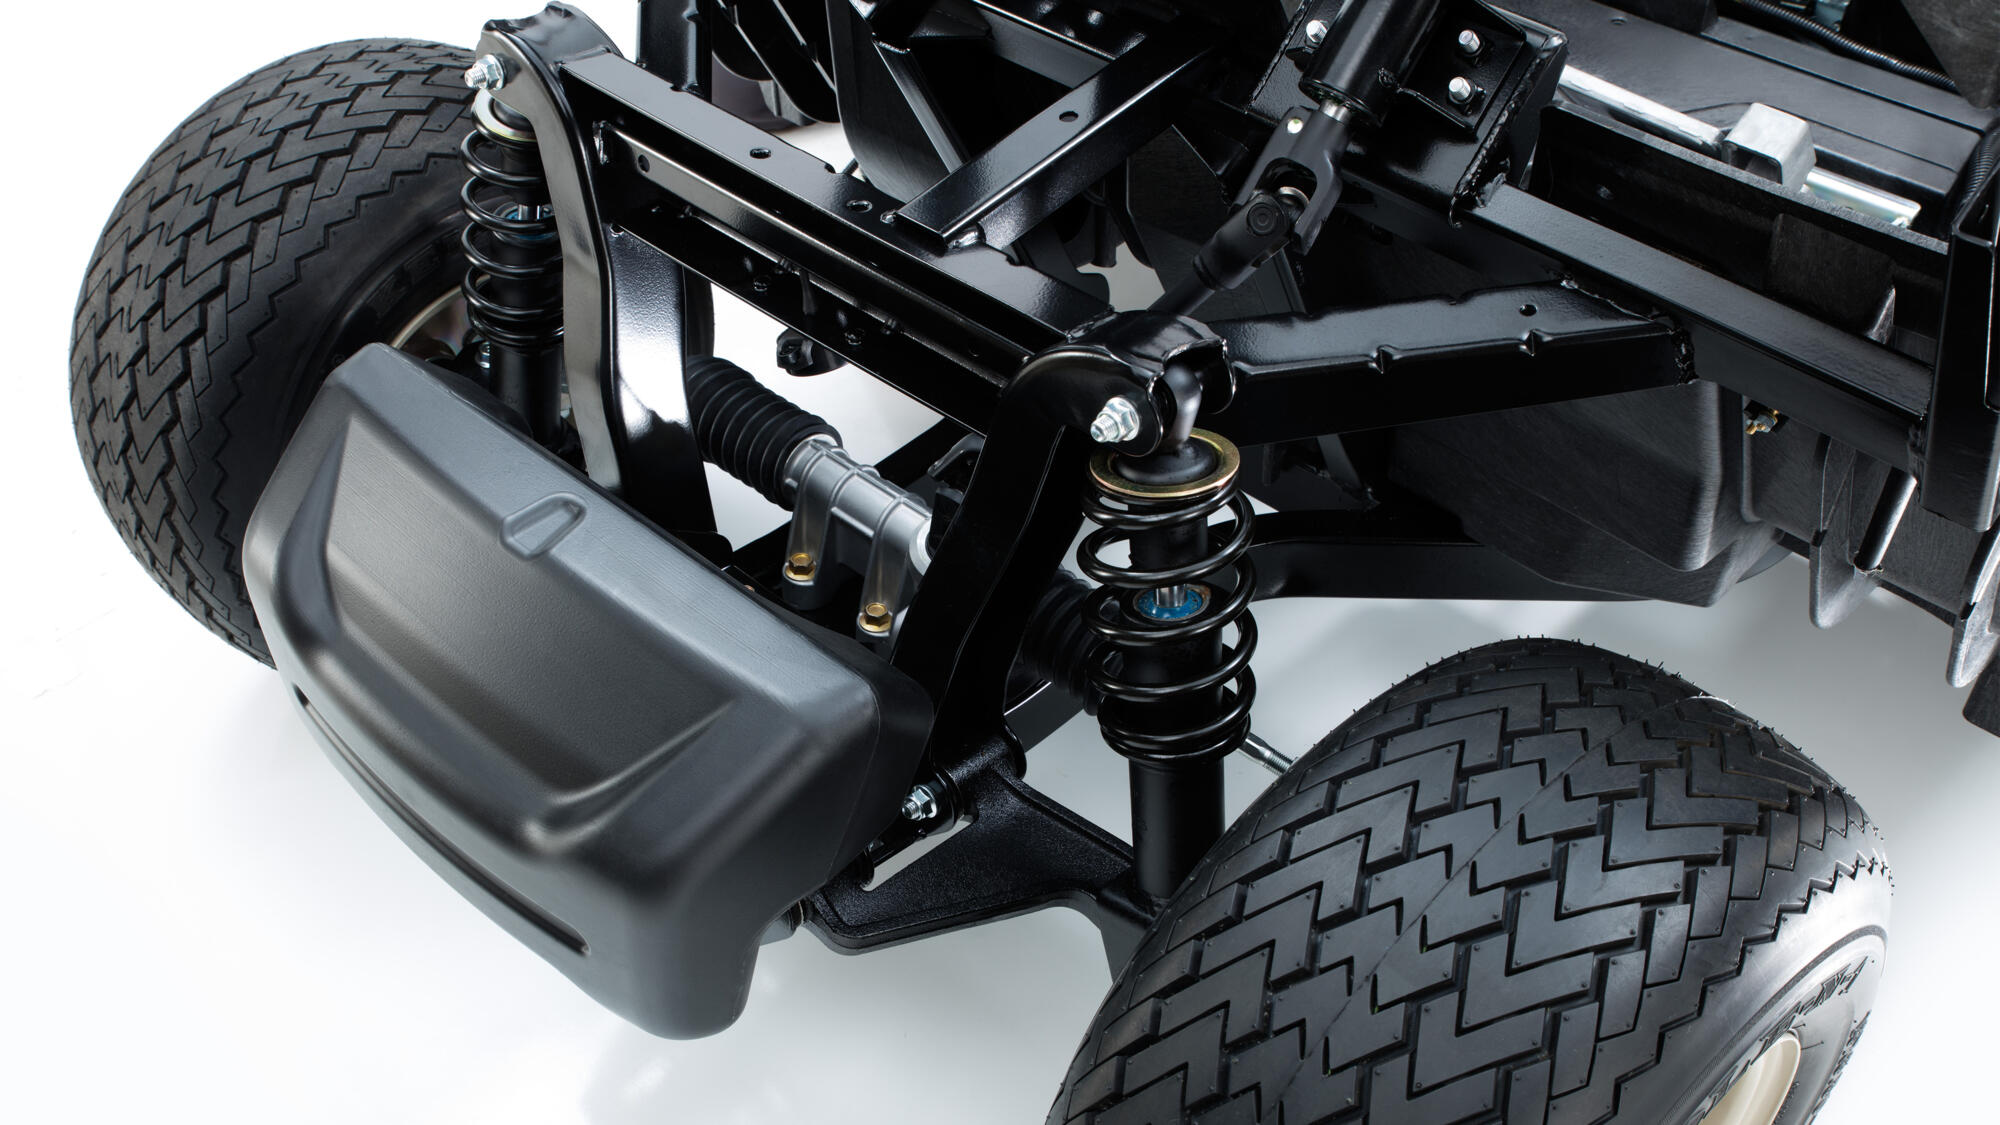 Fully independent front suspension